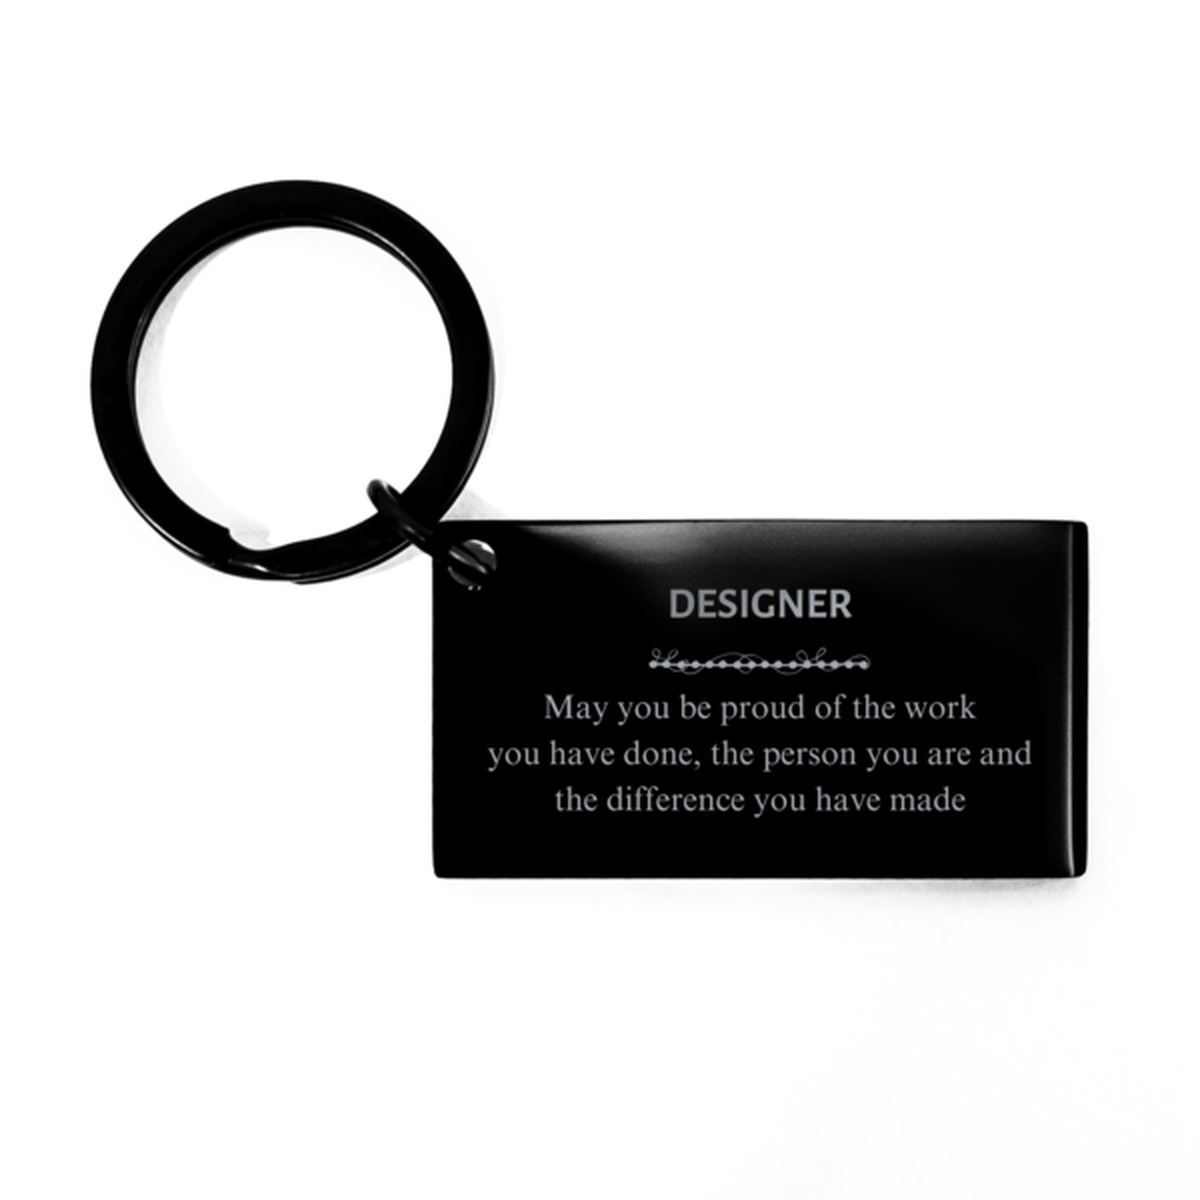 Graphic Designer May you be proud of the work you have done, Retirement Designer Keychain for Colleague Appreciation Gifts Amazing for Designer